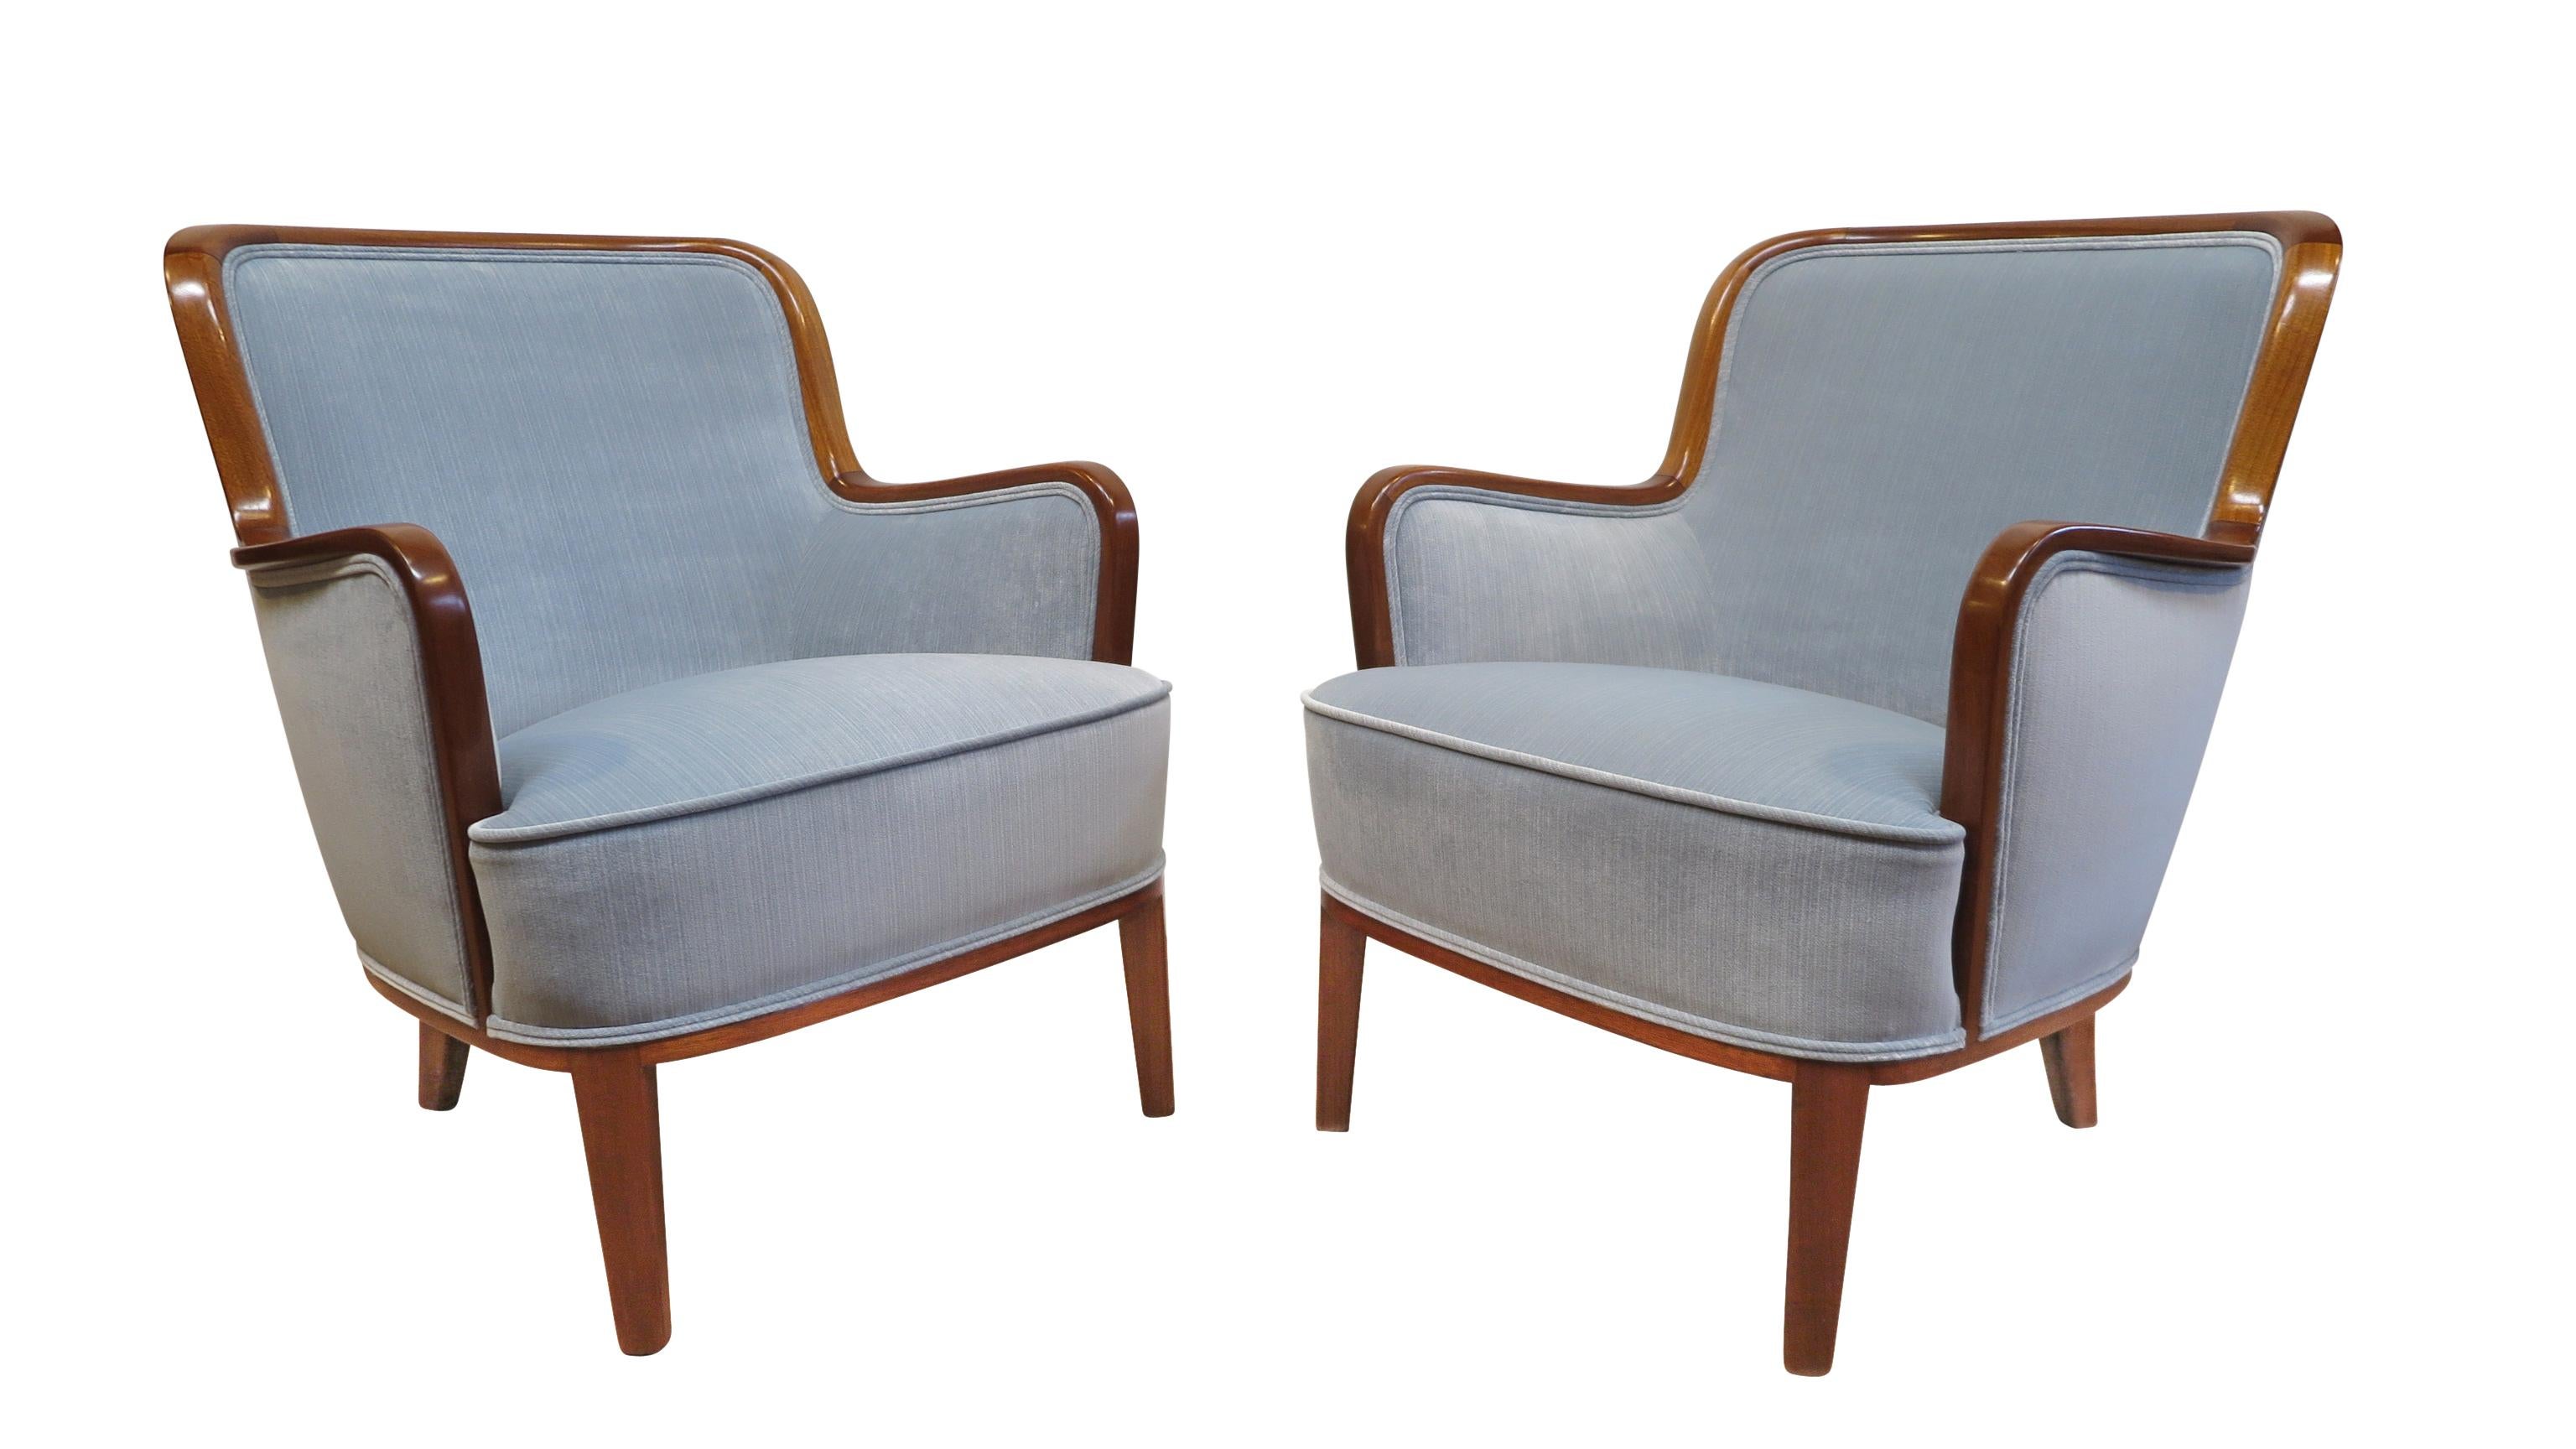 A rare pair of Carl Malmsten easy chairs. Rich sculpted mahogany frames with signature arms newly covered in Nobilis velvet. Excellent condition.